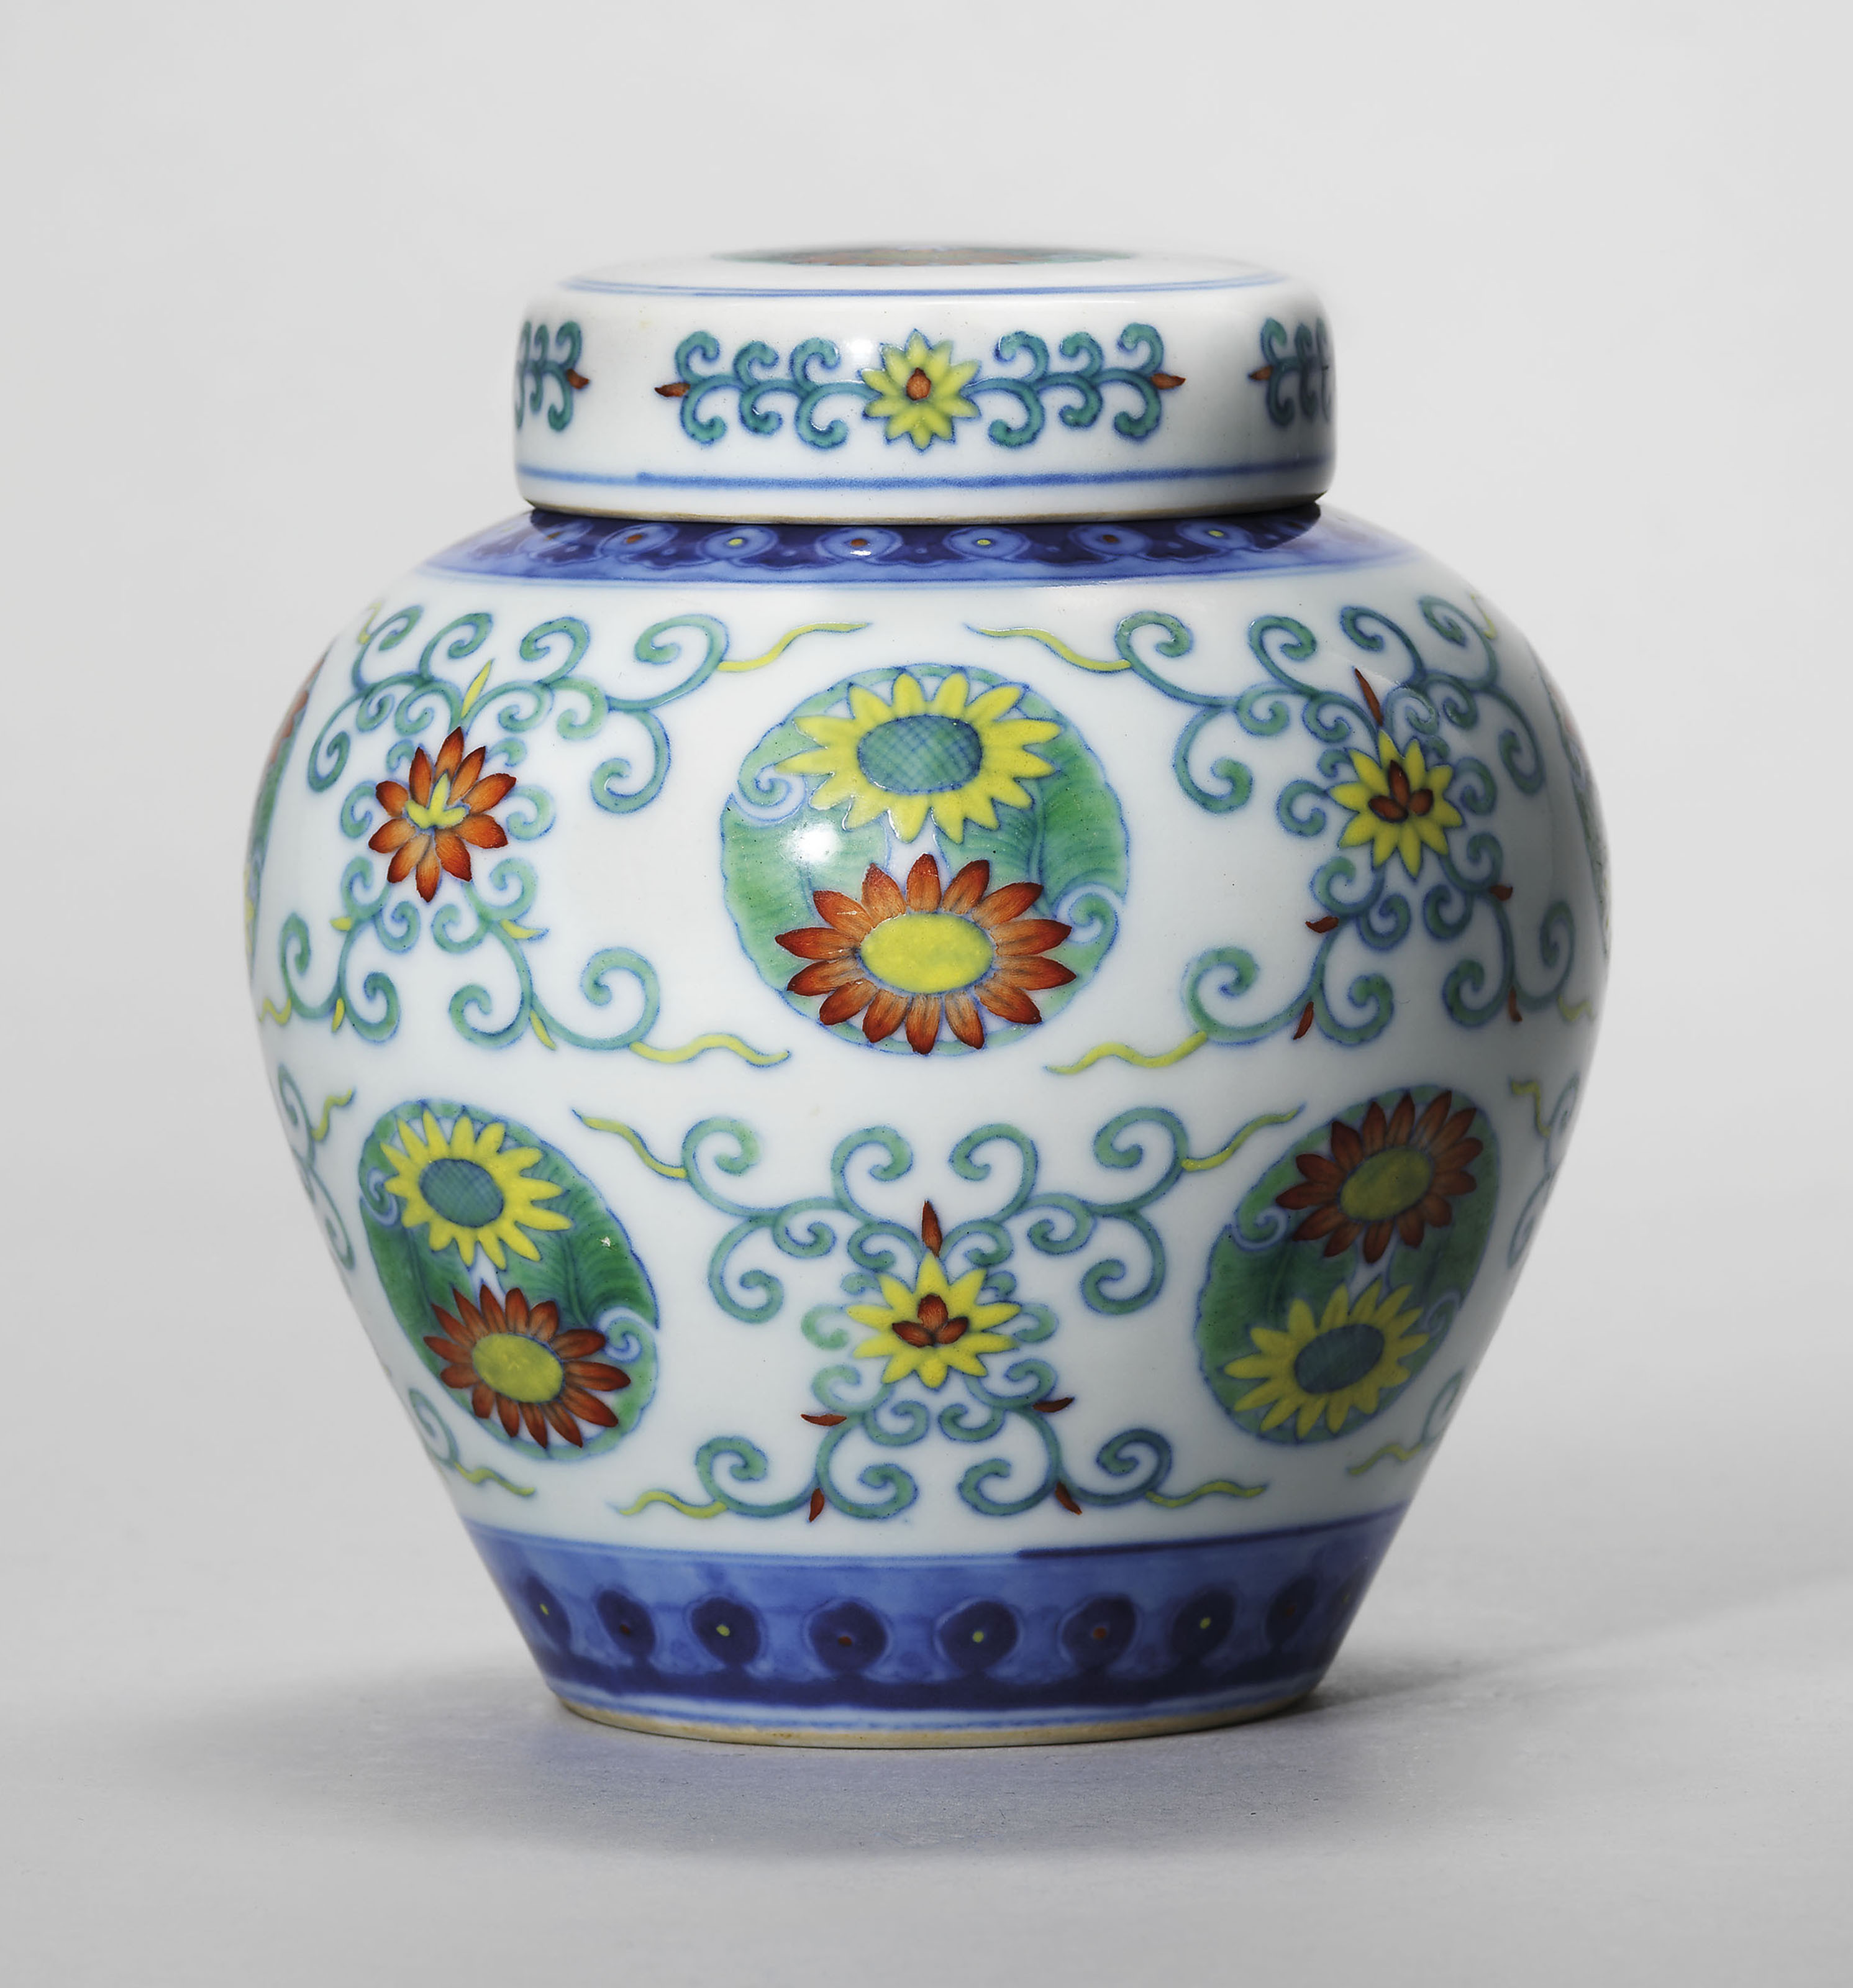 11 Fantastic Ancient Chinese Porcelain Vase 2024 free download ancient chinese porcelain vase of a guide to the symbolism of flowers on chinese ceramics christies for a doucai chrysanthemum jar and cover qianlong six character seal mark in underglaze bl